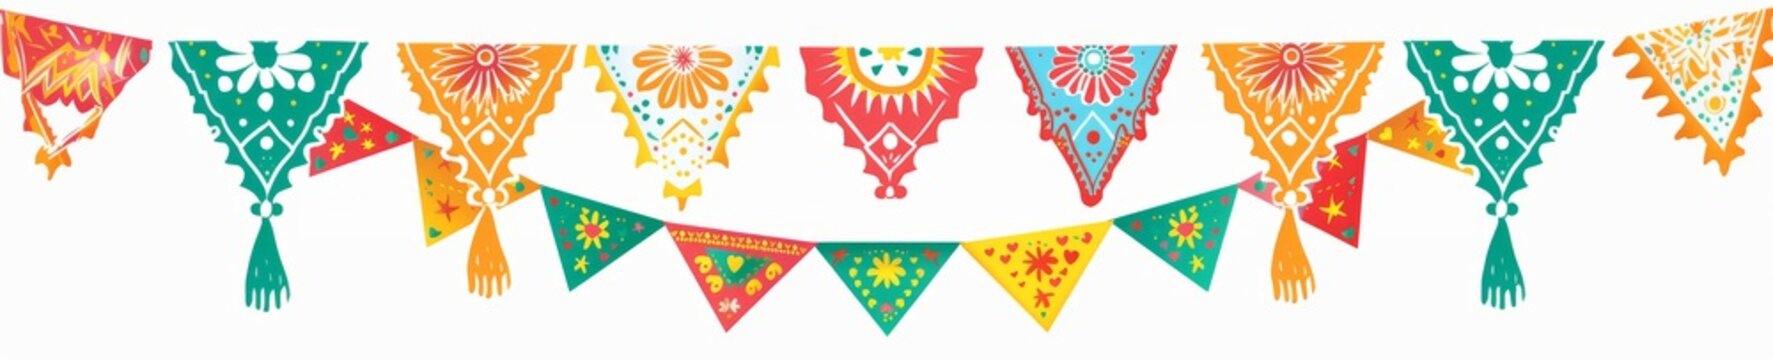 String of handmade cut paper flags on white background. Mexican party decoration. Dia de los Muertos, Halloween, Cinco de Mayo